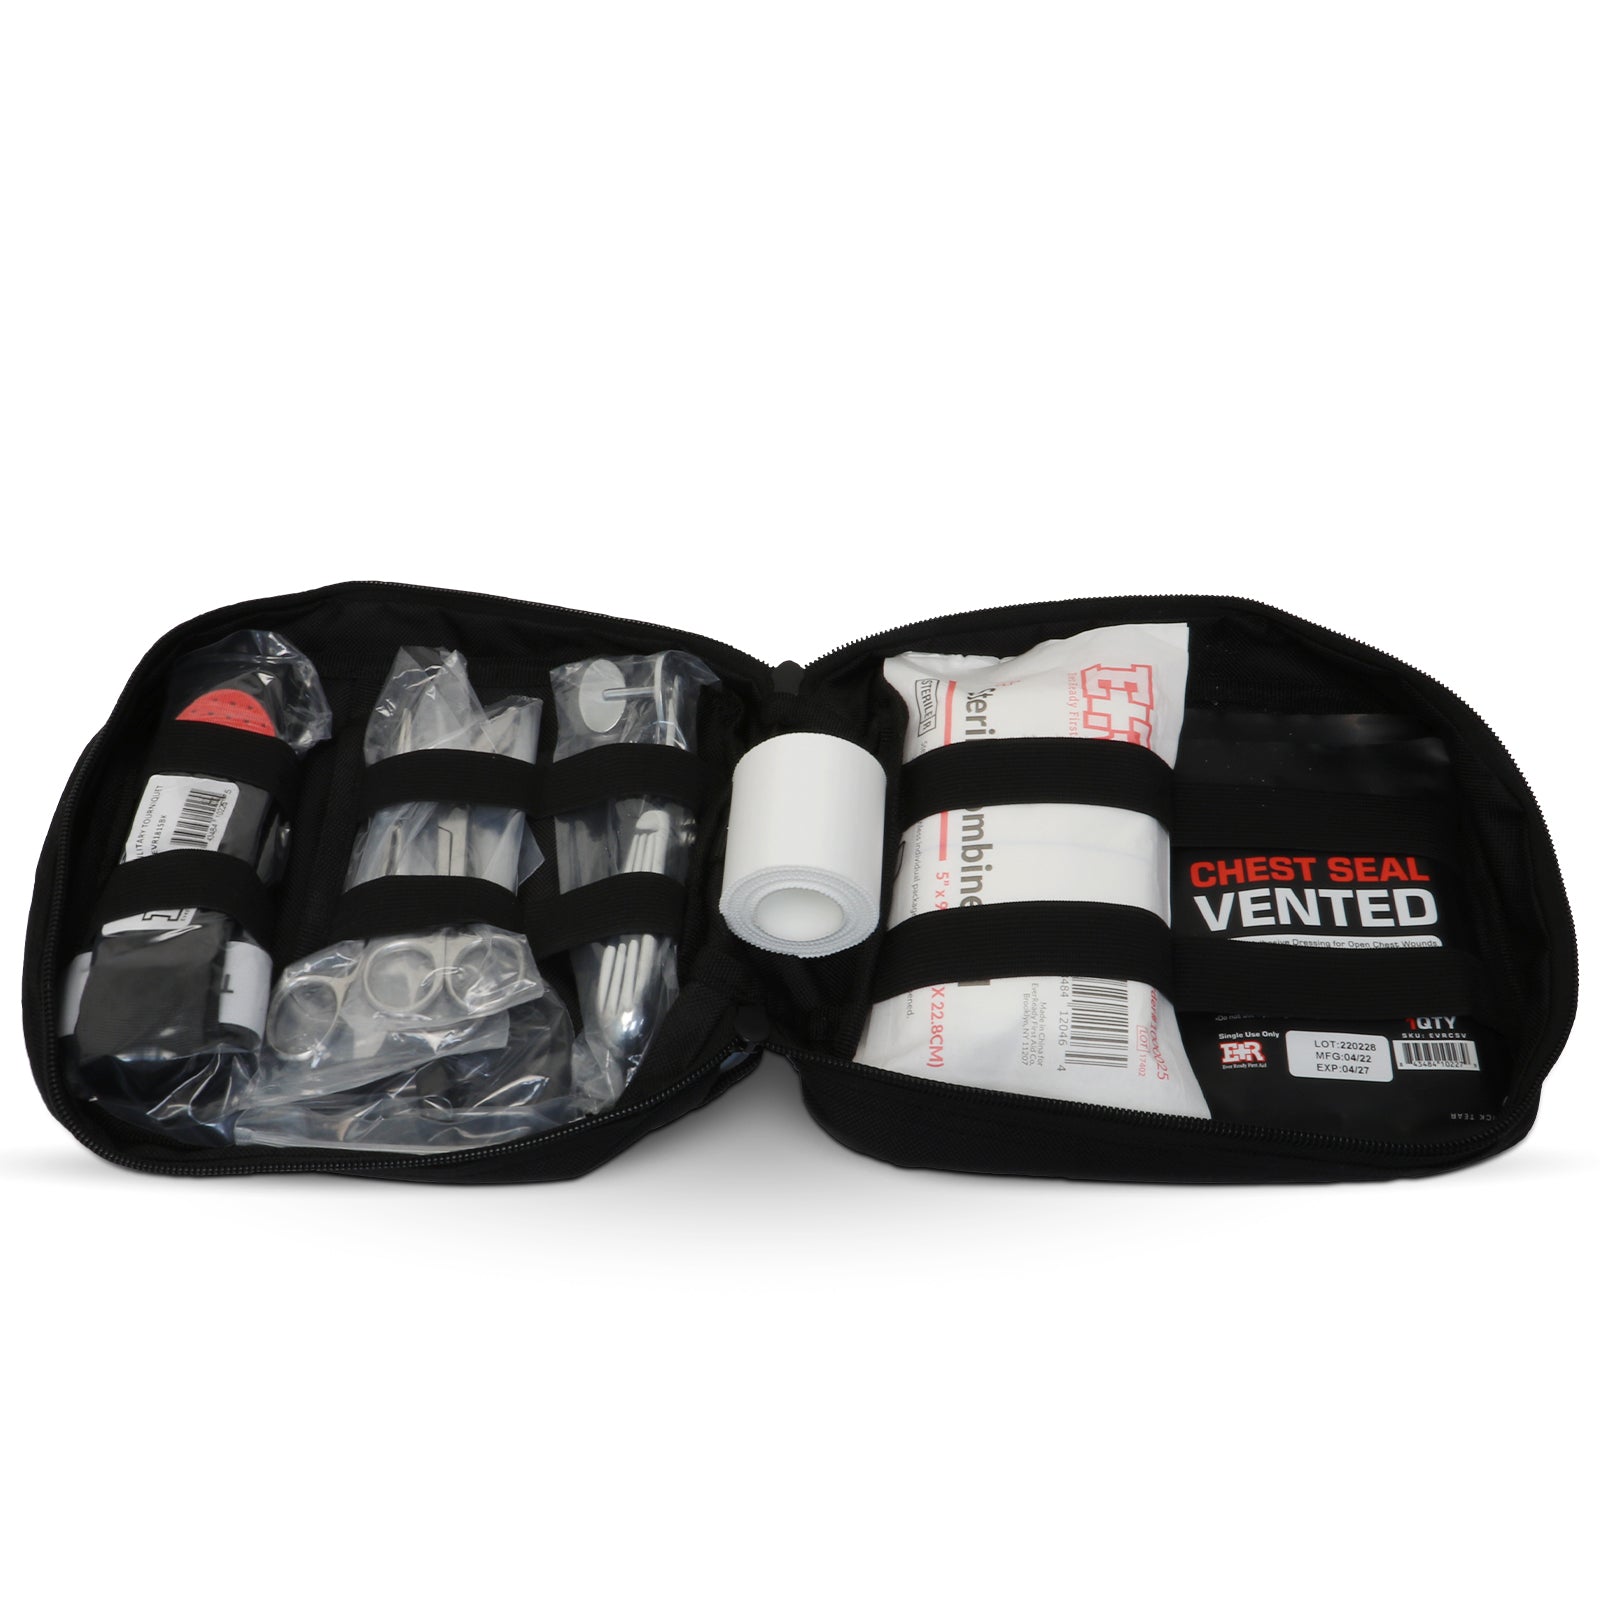 Statpacks G3+ Breather Extra Large Fully Stocked EMT Premium Trauma Bag for Firefighters & First Responders